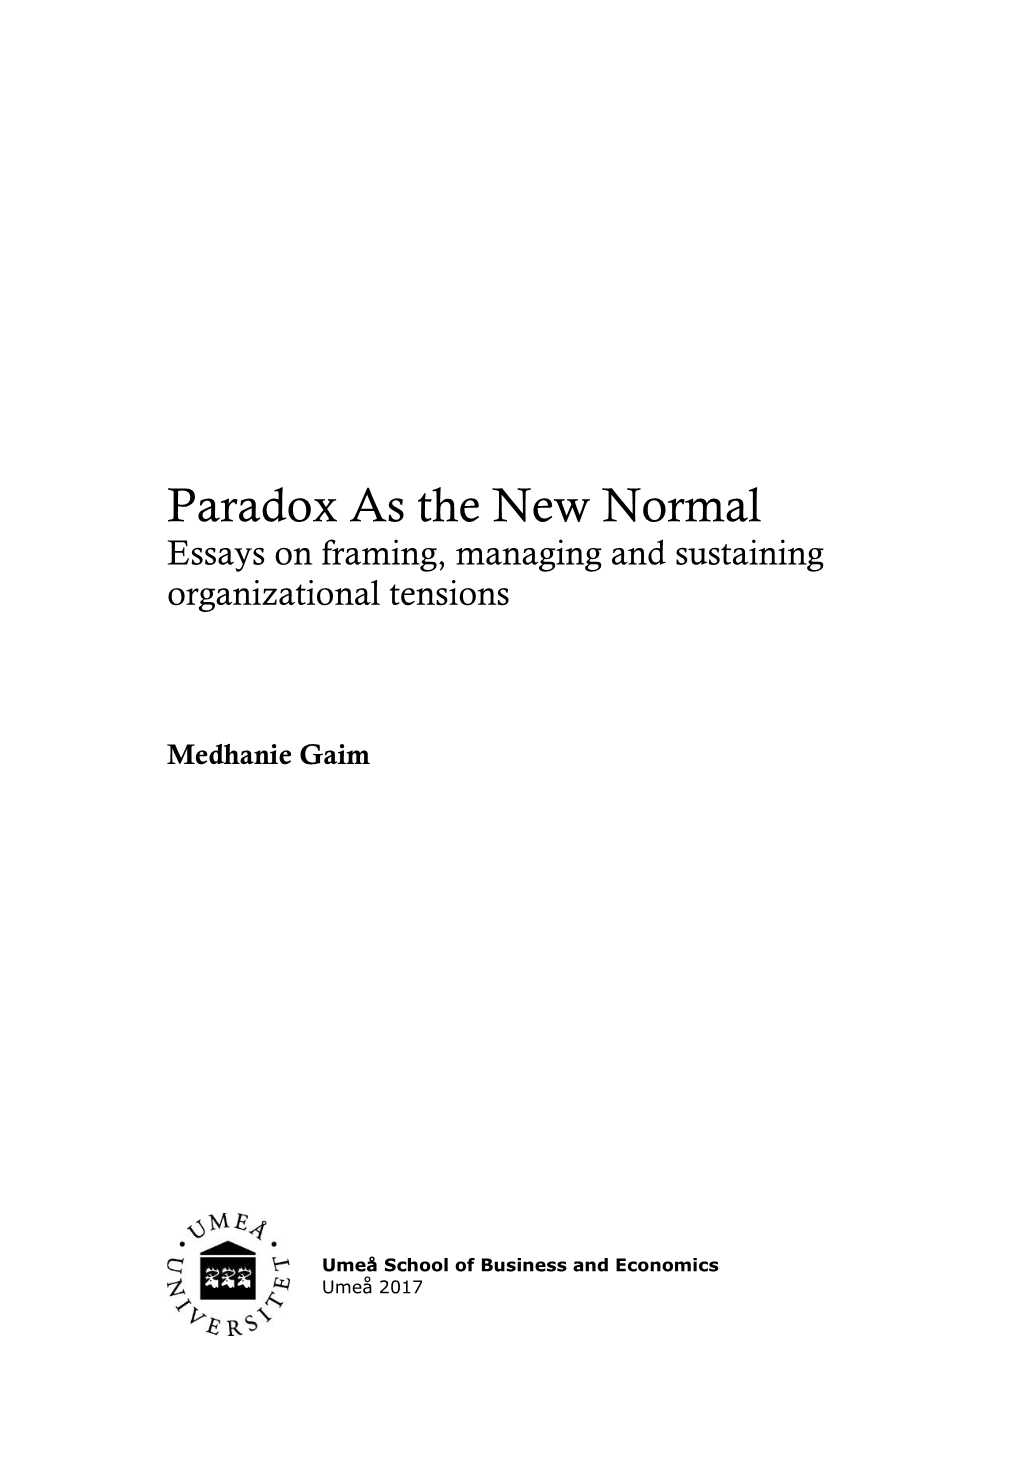 Paradox As the New Normal Essays on Framing, Managing and Sustaining Organizational Tensions